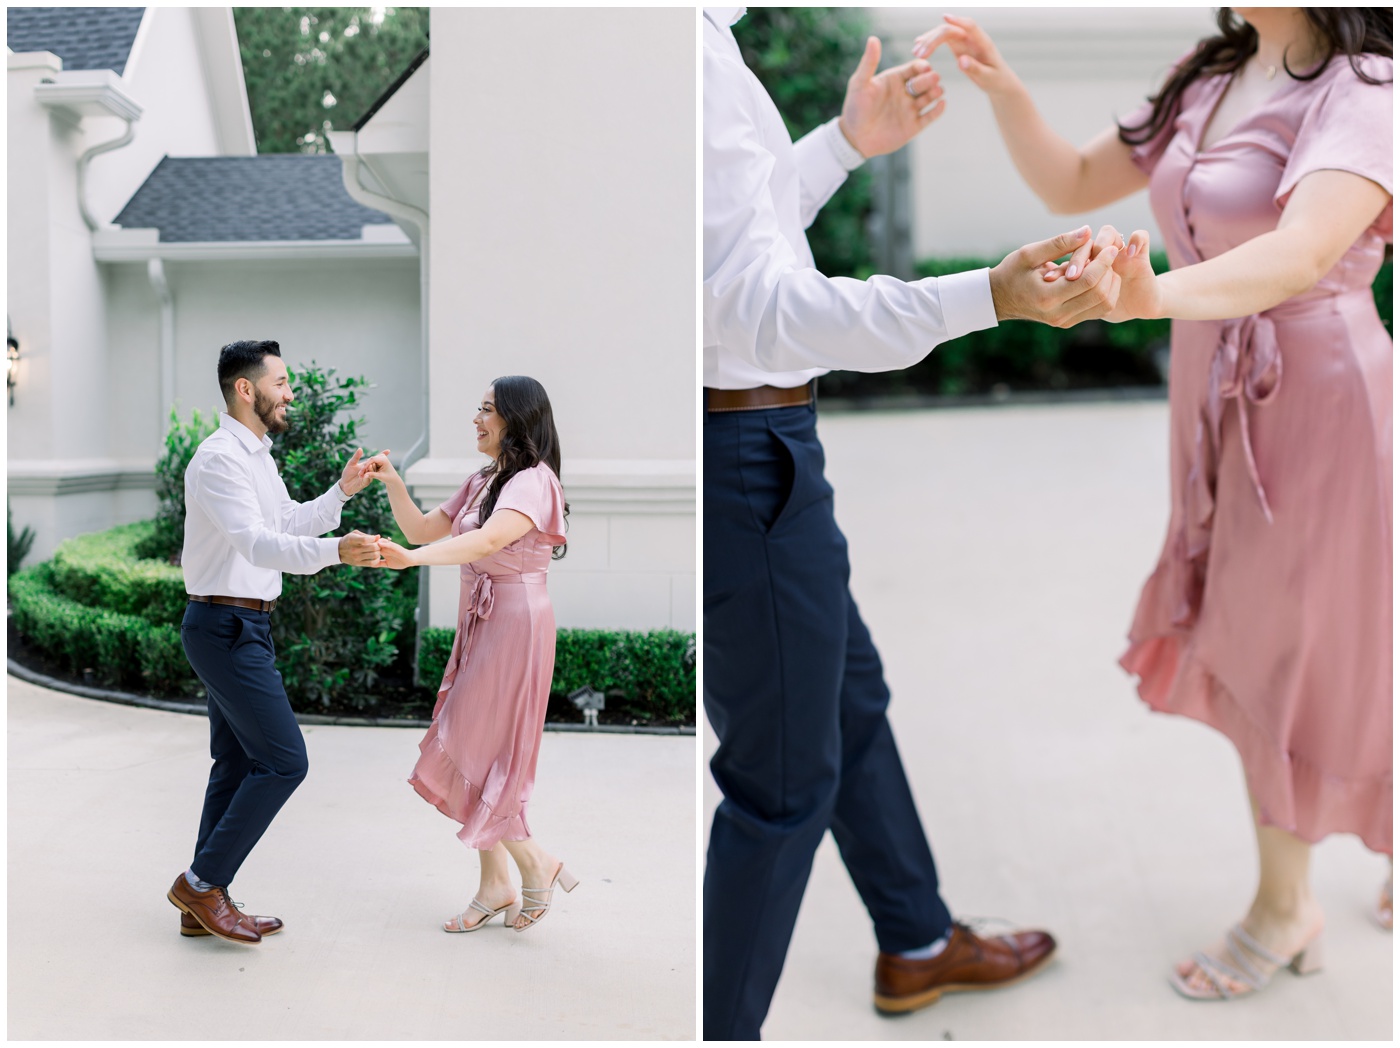 Houston Wedding Photographer | A couple dances together at the Peach Orchard Venue.